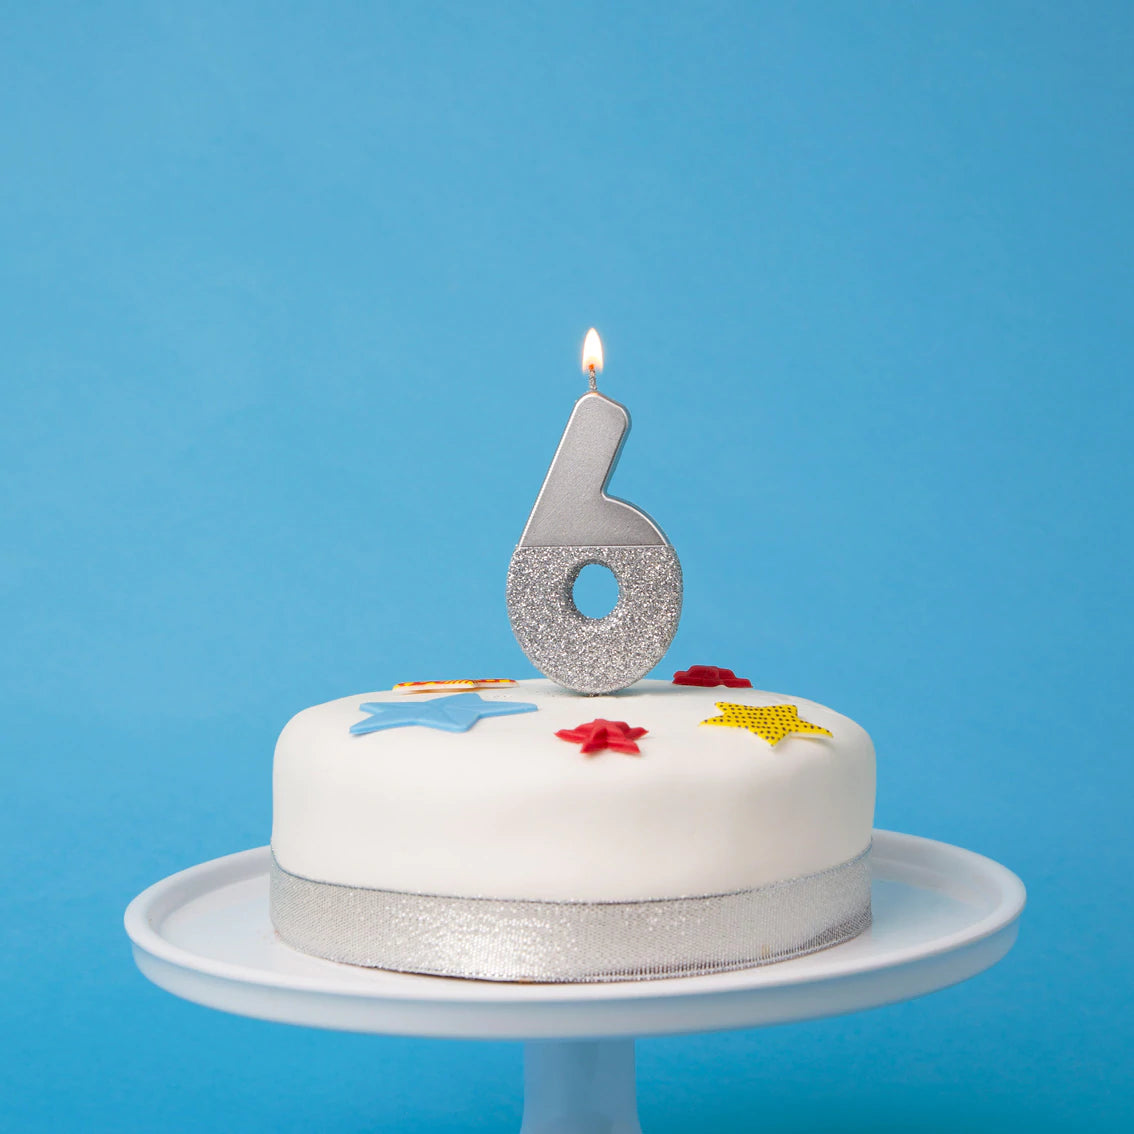 Silver Glitter Dipped Number Birthday Candle 0-9 | The Party Darling